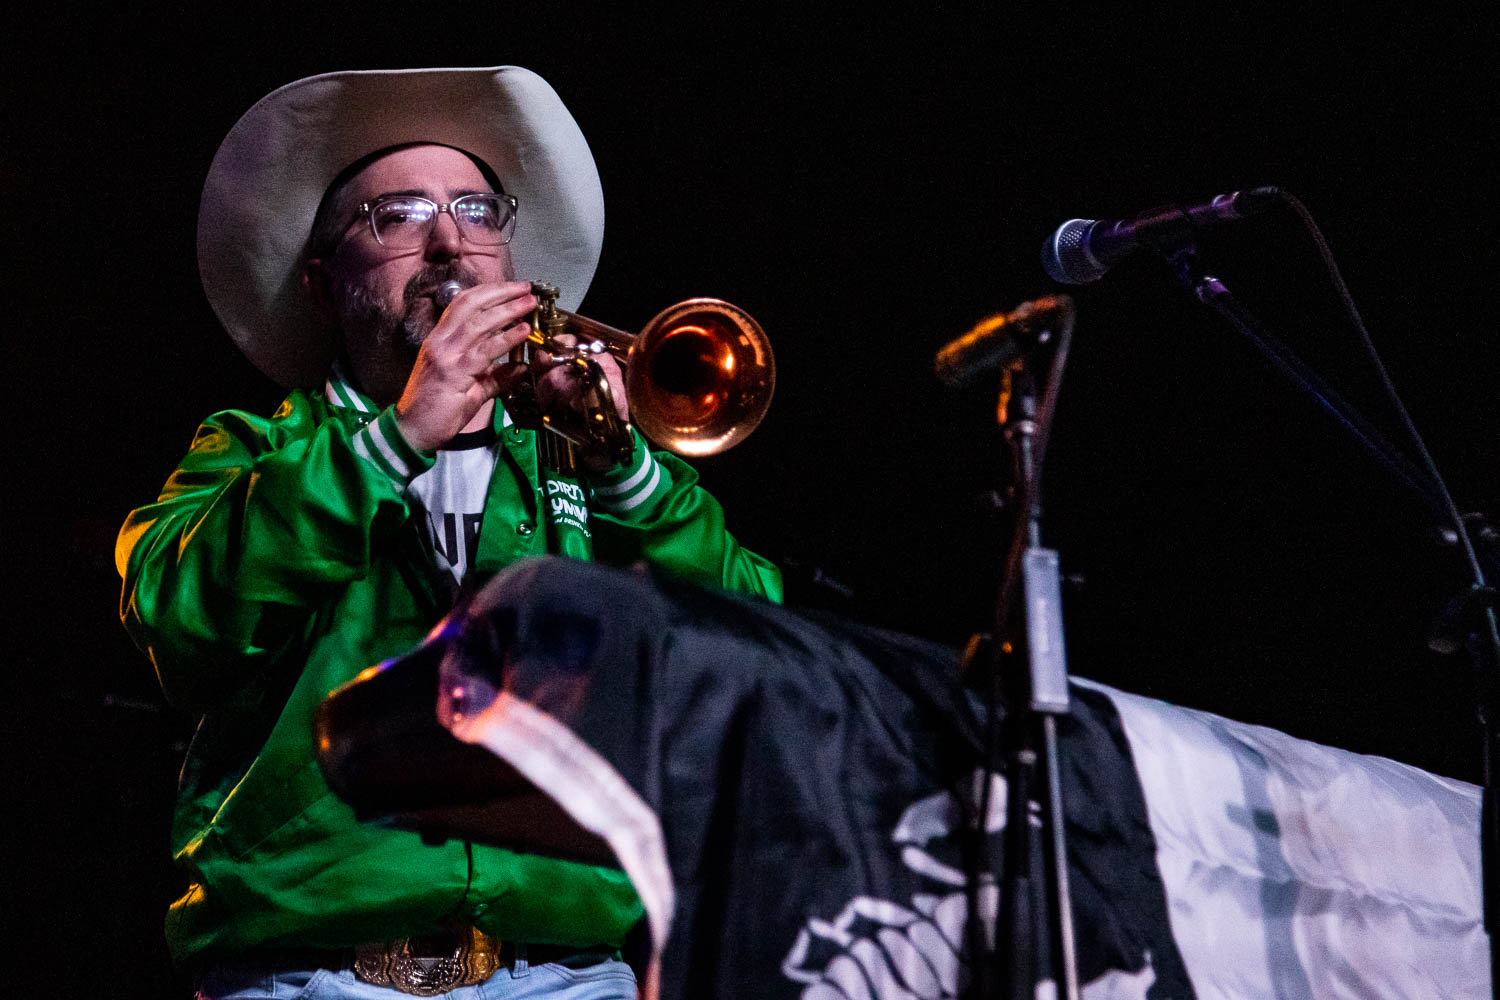 Cory "Round Up" Graves, trumpet player and multi-instrumentalist of The Vandoliers